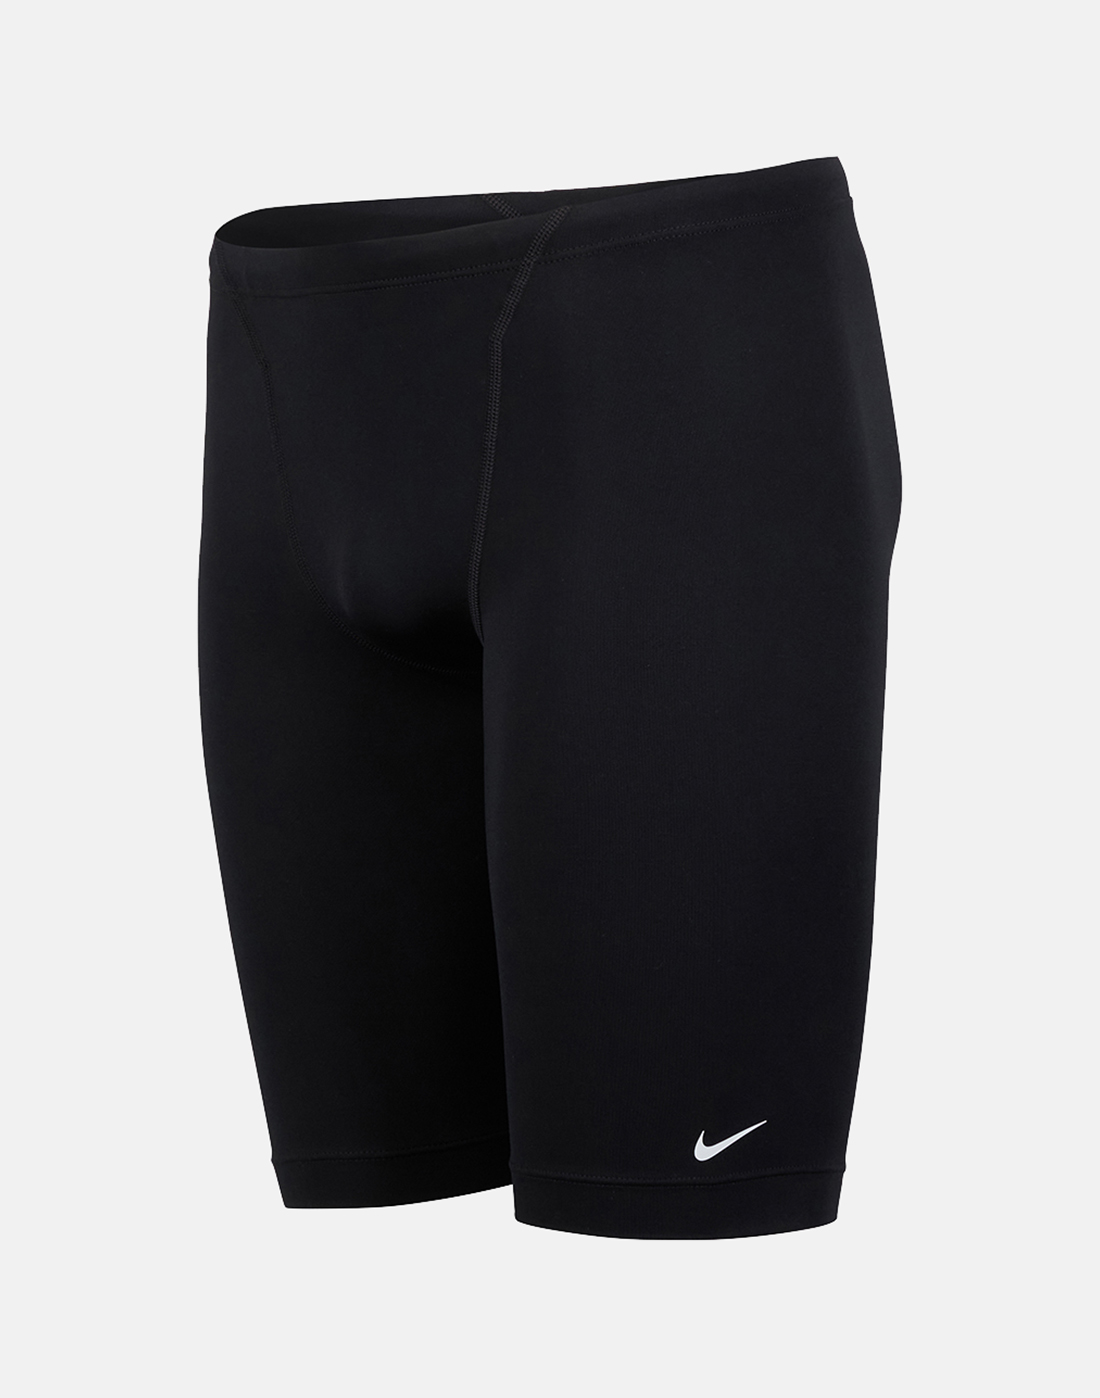 Nike Mens Hydrastrong Jammer - Black | Life Style Sports IE